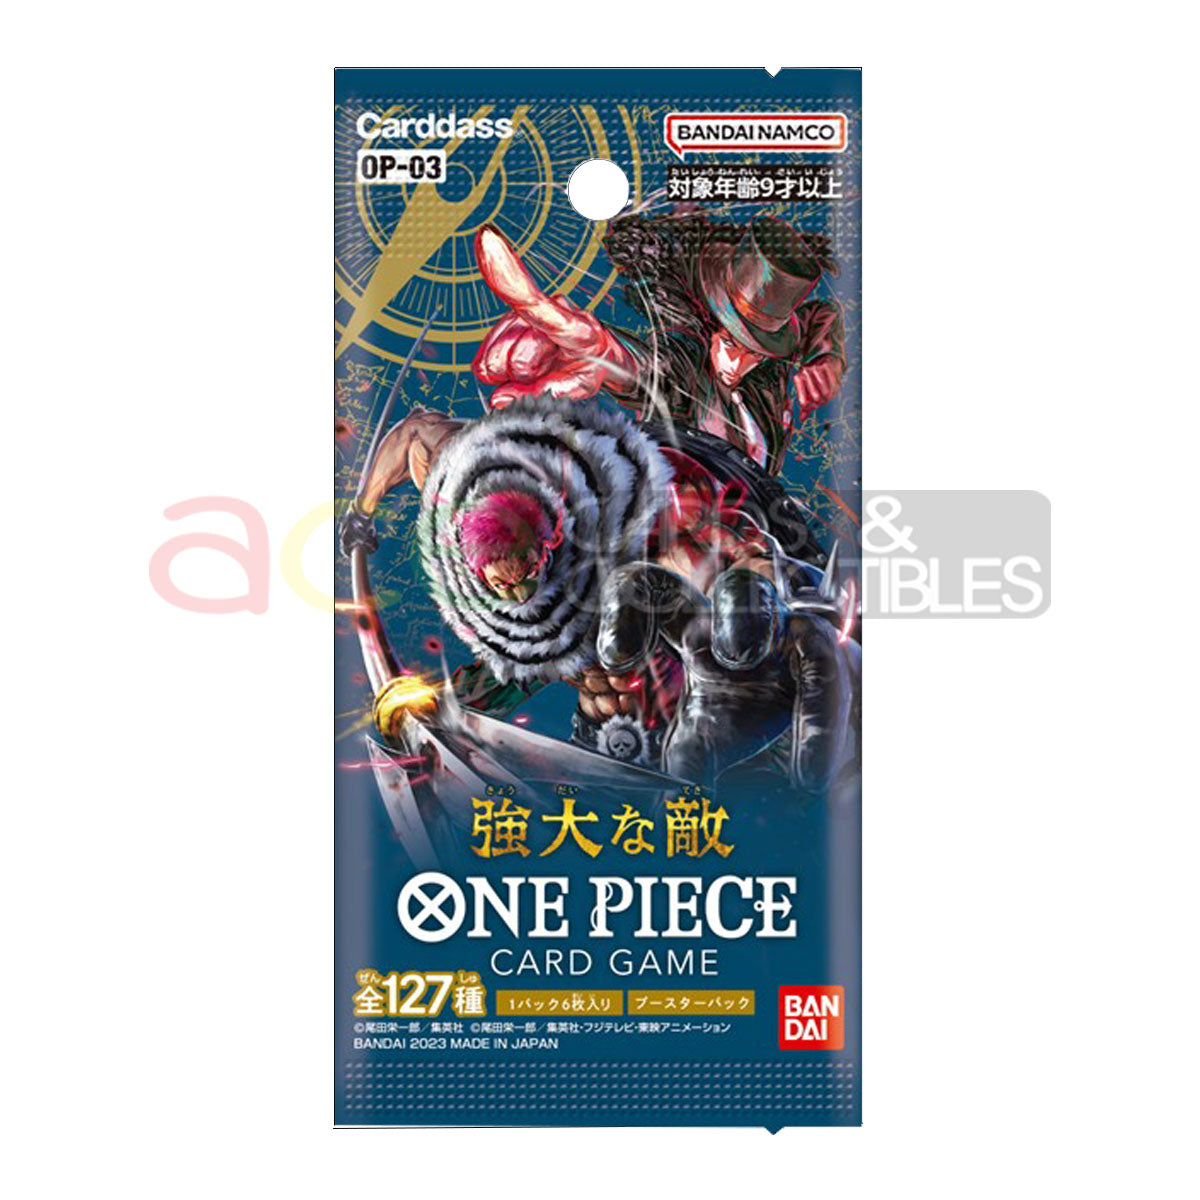 One Piece Card Game Mighty Enemies Carton [OP-03] (Japanese)-Bandai-Ace Cards &amp; Collectibles